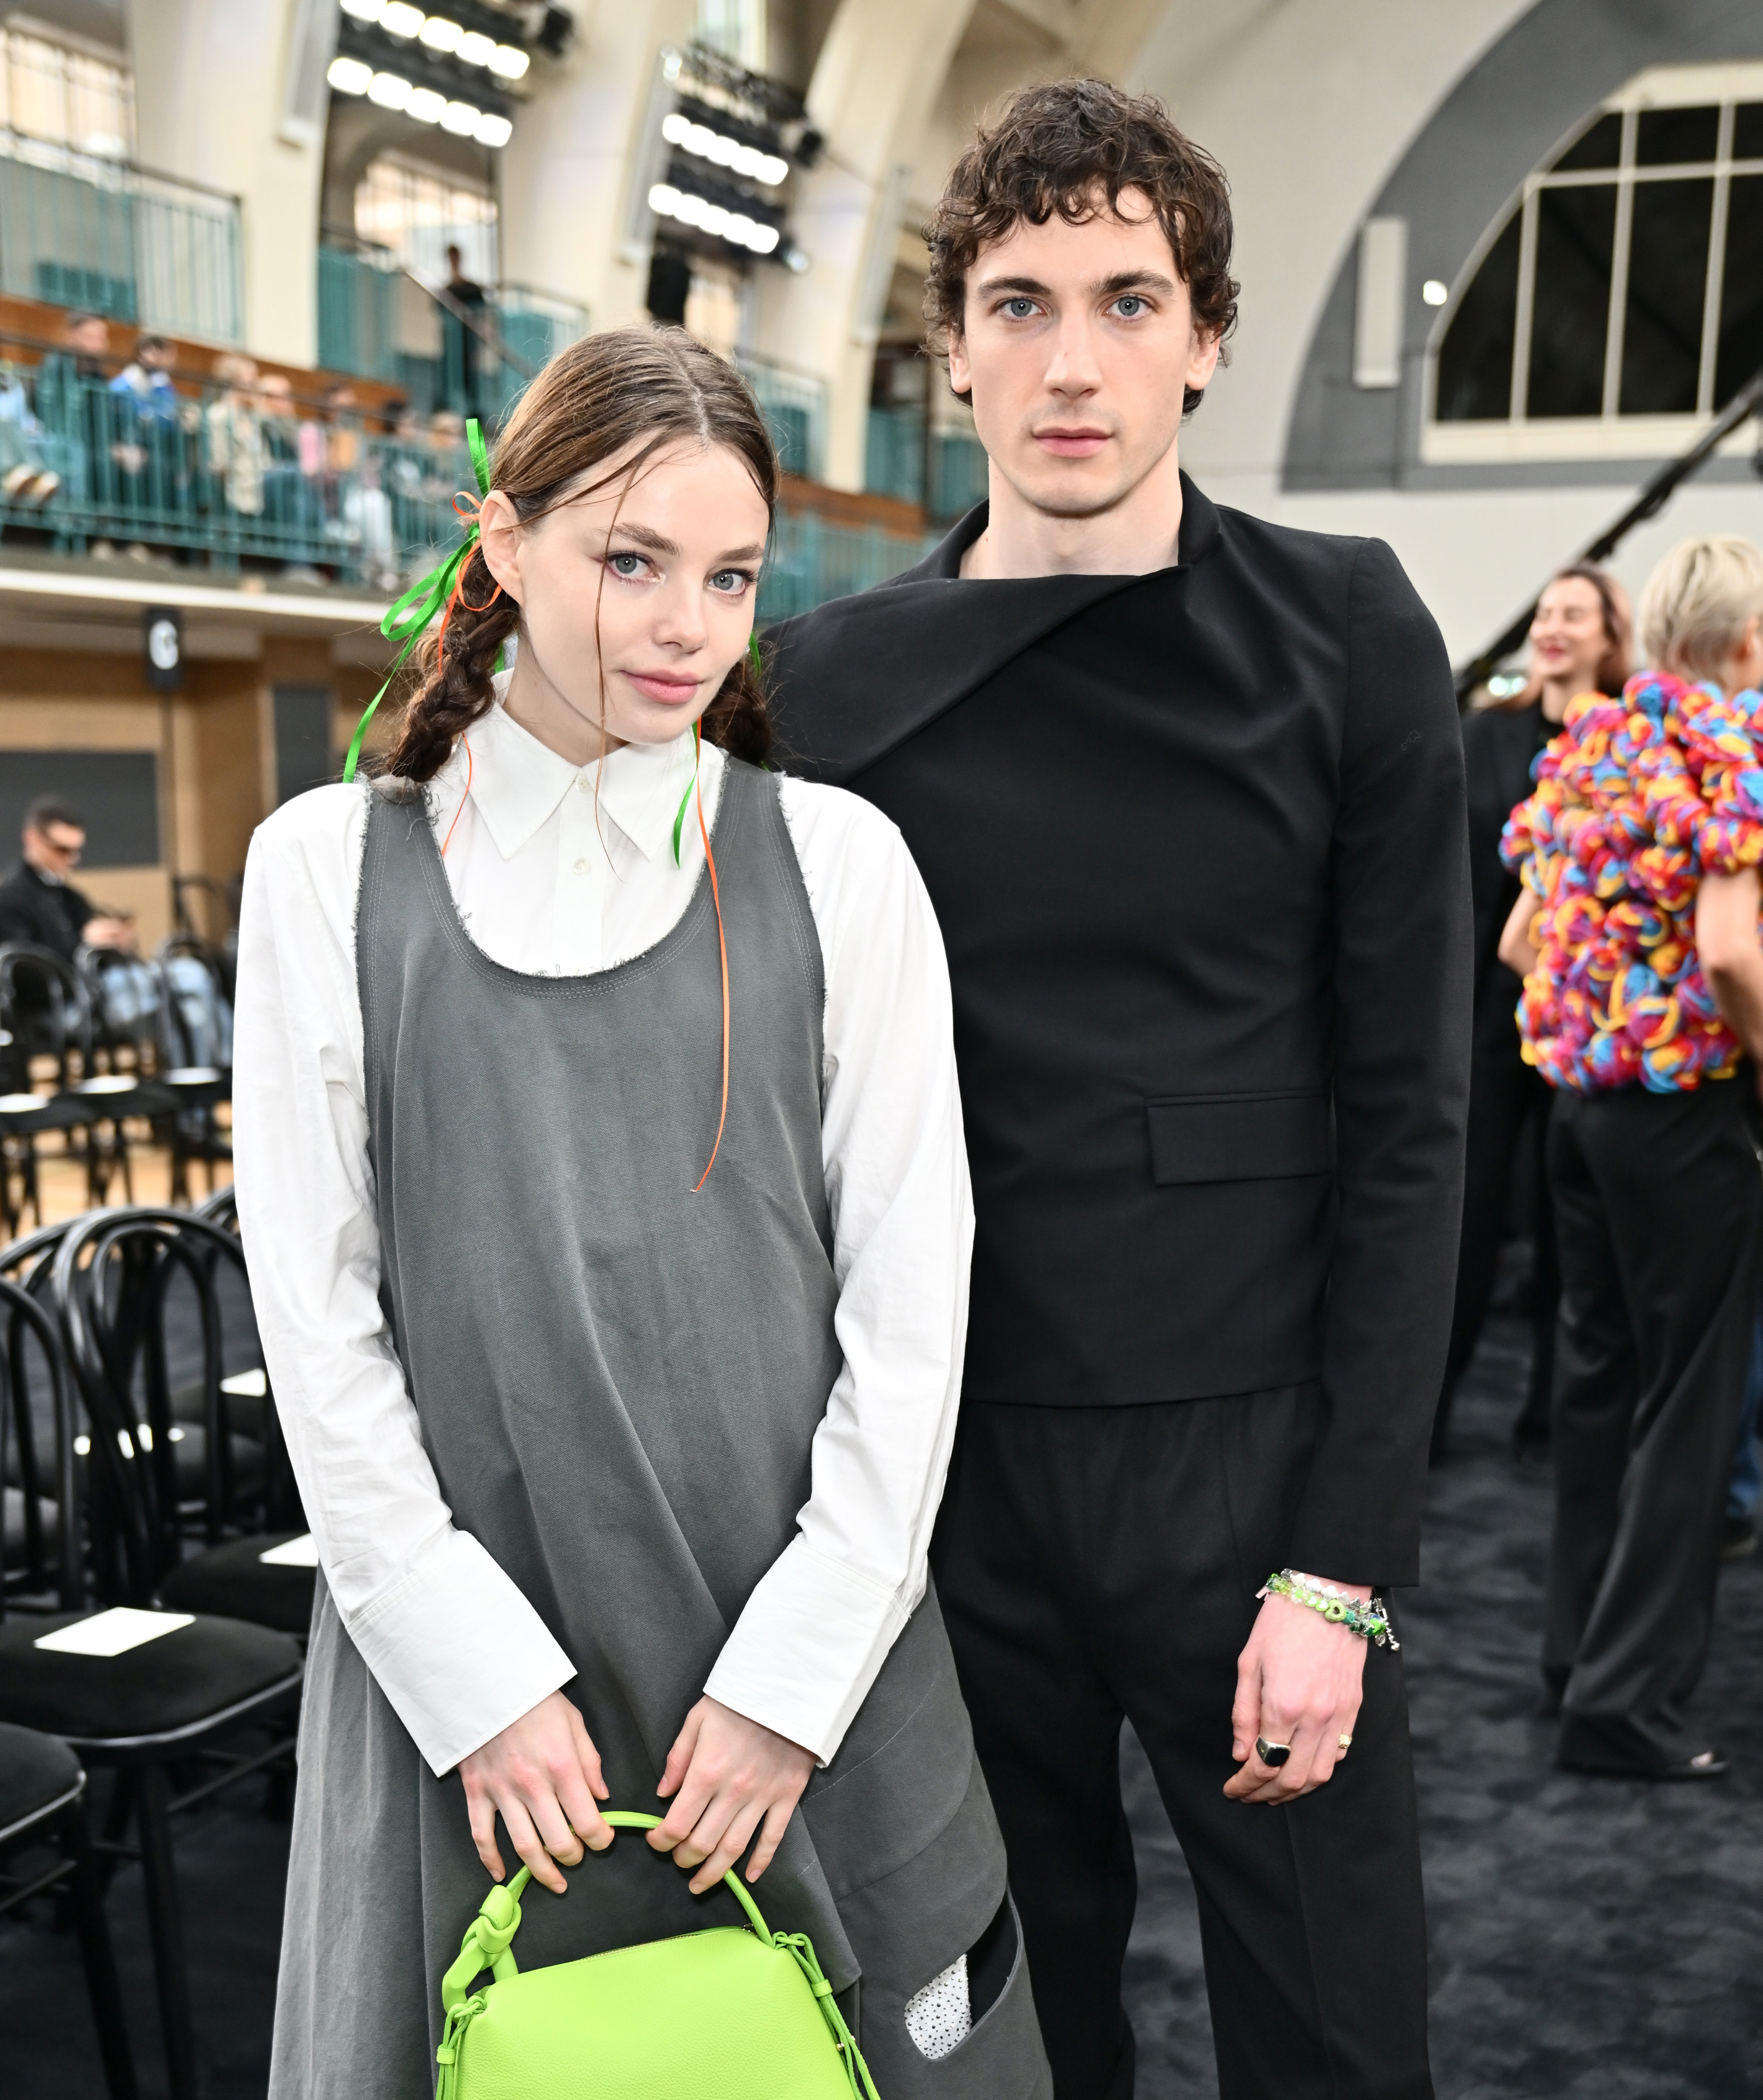 Two individuals at an event, one in a grey dress with a green accent and a neon bag, the other in a black outfit